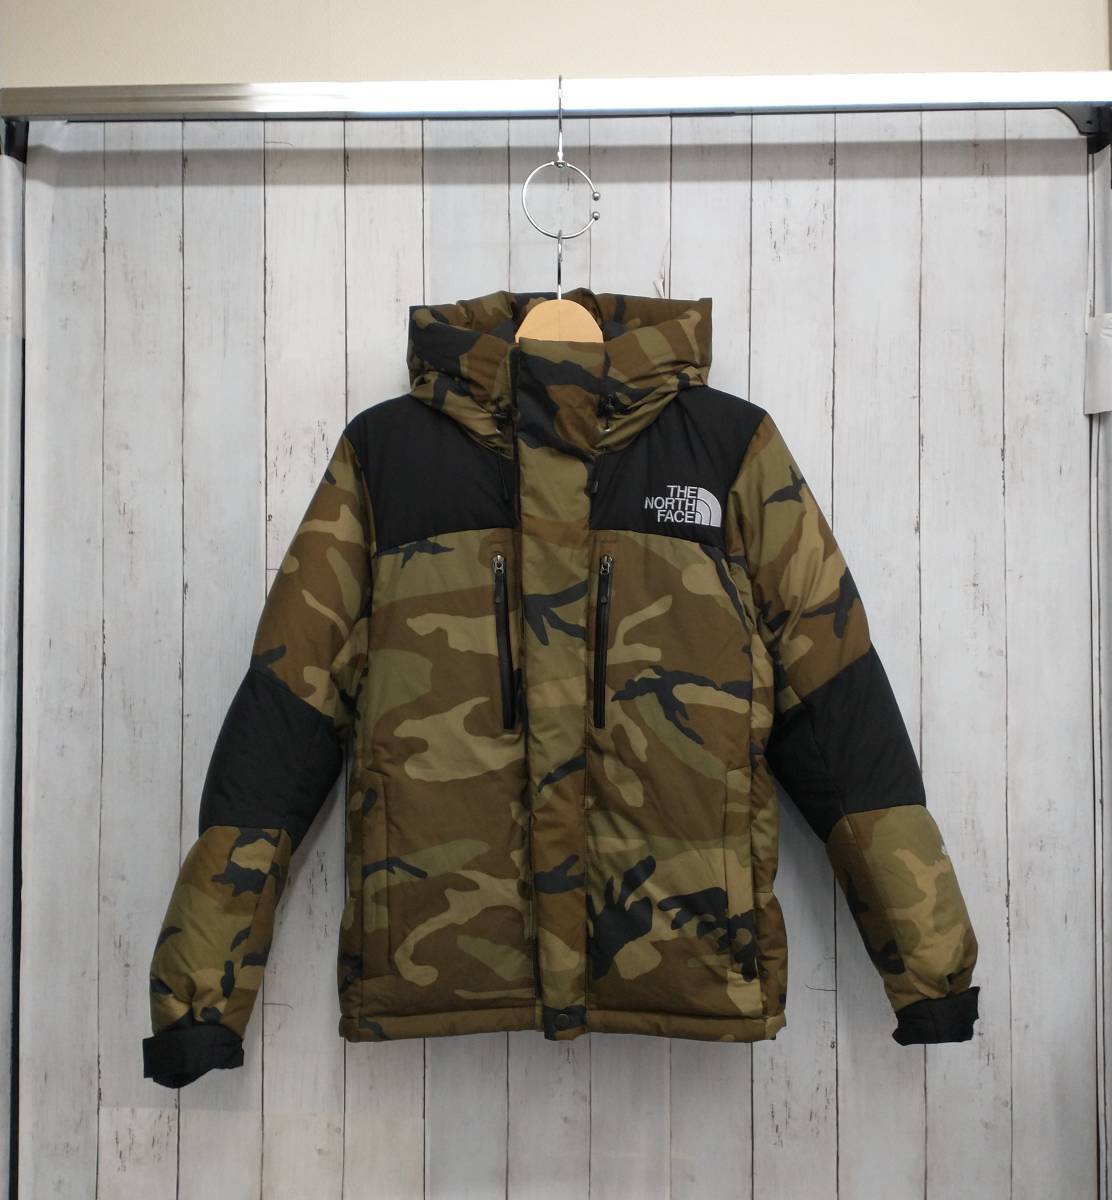 THE NORTH FACE◇Baltro Light Jacket/S/ナイロン/グリーン/カモフラ 